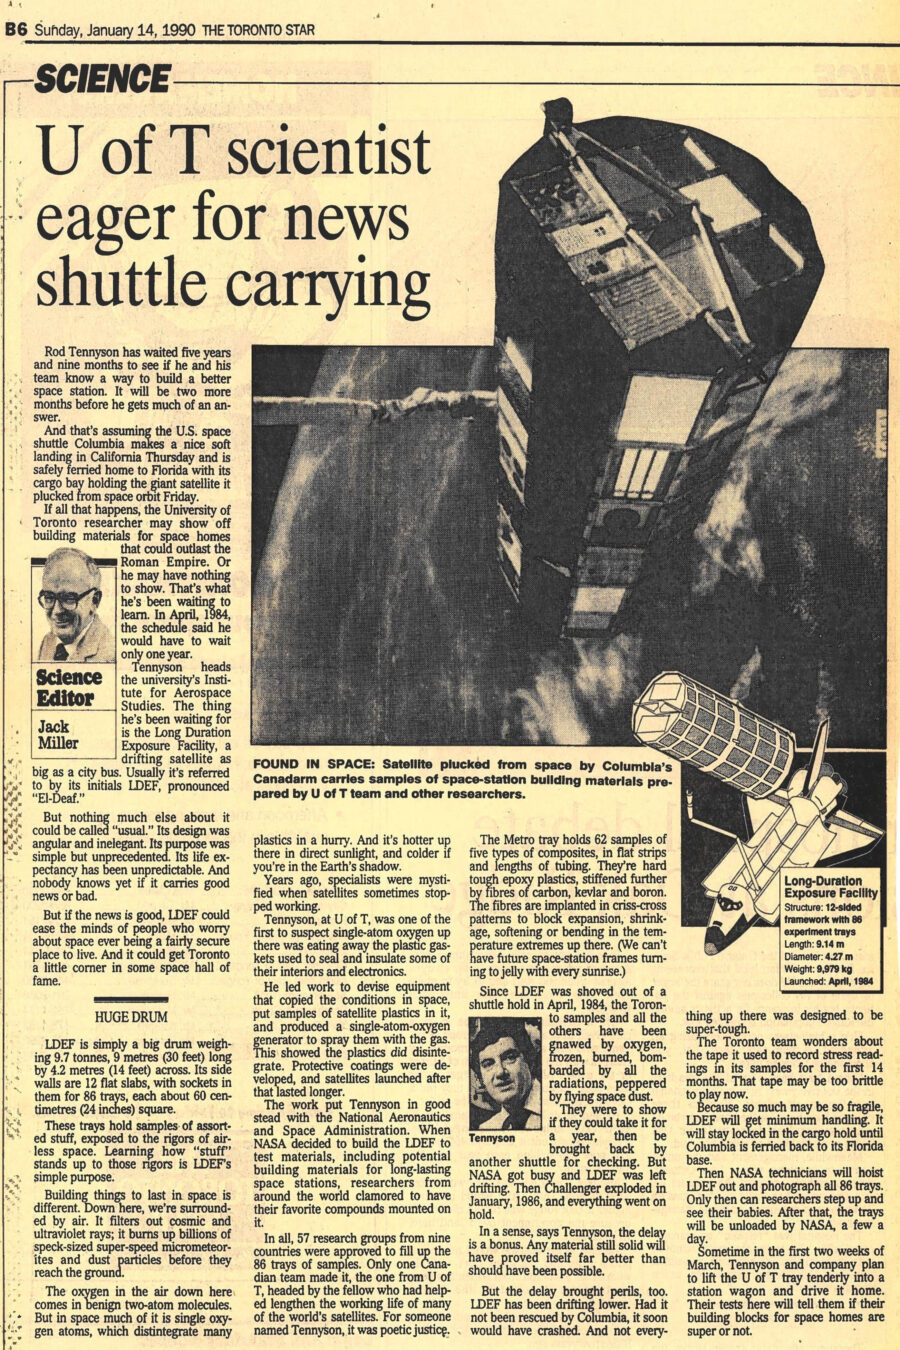 Newspaper clipping from The Toronto Star, January 14, 1990
Headline: U of T scientist eager for news shuttle carrying
Byline: Jack Miller, Science Editor.
Photo 1: The cylindrical body of the LDEF satellite is tethered by the Canadarm, in orbit far above the earth in the background. 
Caption: Found in space: Satellite plucked from space by Columbia’s Canadarm carries samples of space-station building materials prepared by U of T team and other researchers.
Photo 2: Illustration of space shuttle with the LDEF satellite.
Caption: Long-Duration Exposure Facility: Structure: 12-sided framework with 86 experiment trays; Length: 9.14 metres; Diameter: 4.27 metres; Weight: 9,979 kilograms; Launched: April, 1984.
Photo 3: A small headshot of Professor Tennyson.
Caption: Tennyson.
Rod Tennyson has waited five years and nine months to see if he and his team know a way to build a better space station. It will be two more months before he gets an answer. And that’s assuming the United States space shuttle Columbia makes a soft landing in California Thursday and is safely ferried home to Florida with its cargo bay holding the giant satellite it plucked from space orbit Friday. If all that happens, the University of Toronto researcher may show off building materials for space homes that could outlast the Roman Empire. Or he may have nothing to show. That’s what he’s been waiting to learn. In April, 1984, the schedule said he would have to wait only one year.
Tennyson heads the university’s Institute for Aerospace Studies. The thing he’s been waiting for is the Long Duration Exposure Facility, a drifting satellite as big as a city bus. Usually it’s referred to by its initials LDEF, pronounced “El-Deaf.” The satellite’s design was angular and inelegant. Its life expectancy has been unpredictable. And nobody knows yet if it carries good news or bad. But if the news is good, LDEF could ease the minds of people who worry about space ever being a fairly secure place to live. And it could get Toronto a little corner in some space hall of fame.
LDEF is simply a big drum weighing 9.7 tonnes, 9 metres (30 feet) long b 4.2 metres (14 feet) across. Its side walls are 12 flat slabs, with sockets in them for 86 trays, each about 60 centimetres (24 inches) square. These trays hold samples of assorted stuff, exposed to the rigors of airless space. Learning how “stuff” stands up to those rigors is LDEF’s simple purpose.
Building things to last in space is different. Down here, we’re surrounded by air. It filters out cosmic and ultraviolet rays; it burns up billions of speck-sized super-speed micrometeorites and dust particles before they reach the ground. The oxygen in the air down here comes in benign two-atom molecules. But in space much of it is single oxygen atoms, which disintegrate many plastics in a hurry. And it’s hotter up there in direct sunlight, and colder if you’re in the Earth’s shadow.
Years ago, specialists were mystified when satellites stopped working. Tennyson, at the University of Toronto, was one of the first to suspect single-atom oxygen up there was eating away the plastic gaskets used to seal and insulate some of their interiors and electronics. He led work to devise equipment that copied the conditions in space, put samples of satellite plastics in it, and produced a single-atom oxygen generator to spray them with the gas. This showed the plastics did disintegrate. Protective coatings were developed, and satellites launched after that lasted longer.
The work put Tennyson in good stead with the National Aeronautics and space Administration. When NASA decided to build the LDEF to test materials, including potential building materials for long-lasting space stations, researchers from around the world clamored to have their favourite compounds mounted on it. Fifty-seven research groups from nine countries were approved to fill up the eighty-six trays of samples. Only one Canadian team made it, the one from the University of Toronto, headed by the fellow who had helped to lengthen the working life of many of the world’s satellites. The U of T tray holds sixty-two samples of five types of composites, in flat strips and lengths of tubing. They’re hard tough epoxy plastics, stiffened further by fibres of carbon, Kevlar and boron. The fibres are implanted in criss-cross patterns to block expansion, shrinkage, softening or bending in the temperature extremes up there.
Since LDEF was shoved out of a shuttle hold in April, 1984, the Toronto samples and all the others have been gnawed by oxygen, frozen, burned, bombarded by radiation, peppered by flying space dust. They were to show if they could take it for a year, then be brought back by another shuttle for checking. But NASA got busy and LDEF was left drifting. Then Challenger exploded in January, 1986, and everything went on hold. In a sense, says Tennyson, the delay is a bonus. Any material still solid will have proved itself far better than should have been possible.
But the delay has brought perils, too. LDEF has been drifting lower. Had it not been rescued by Columbia, it soon would have crashed. And not everything up there was designed to be super-tough. The Toronto team wonders about the tape it used to record stress readings in its samples for the first fourteen months. That tape may be too brittle to play now. Because so much may be so fragile, LDEF will get minimum handling. It will stay locked in the cargo hold until Columbia is ferried back to its Florida base. Then NASA technicians will hoist LDEF out and photograph all eighty-six trays. Only then can researchers step up and see their babies. After that, the trays will be unloaded by NASA, a few a day. Some time in the first two weeks of March, Tennyson and company plan to lift the University of Toronto tray into a station wagon and drive it home. Their tests will tell them if their building blocks for space homes are super or not.